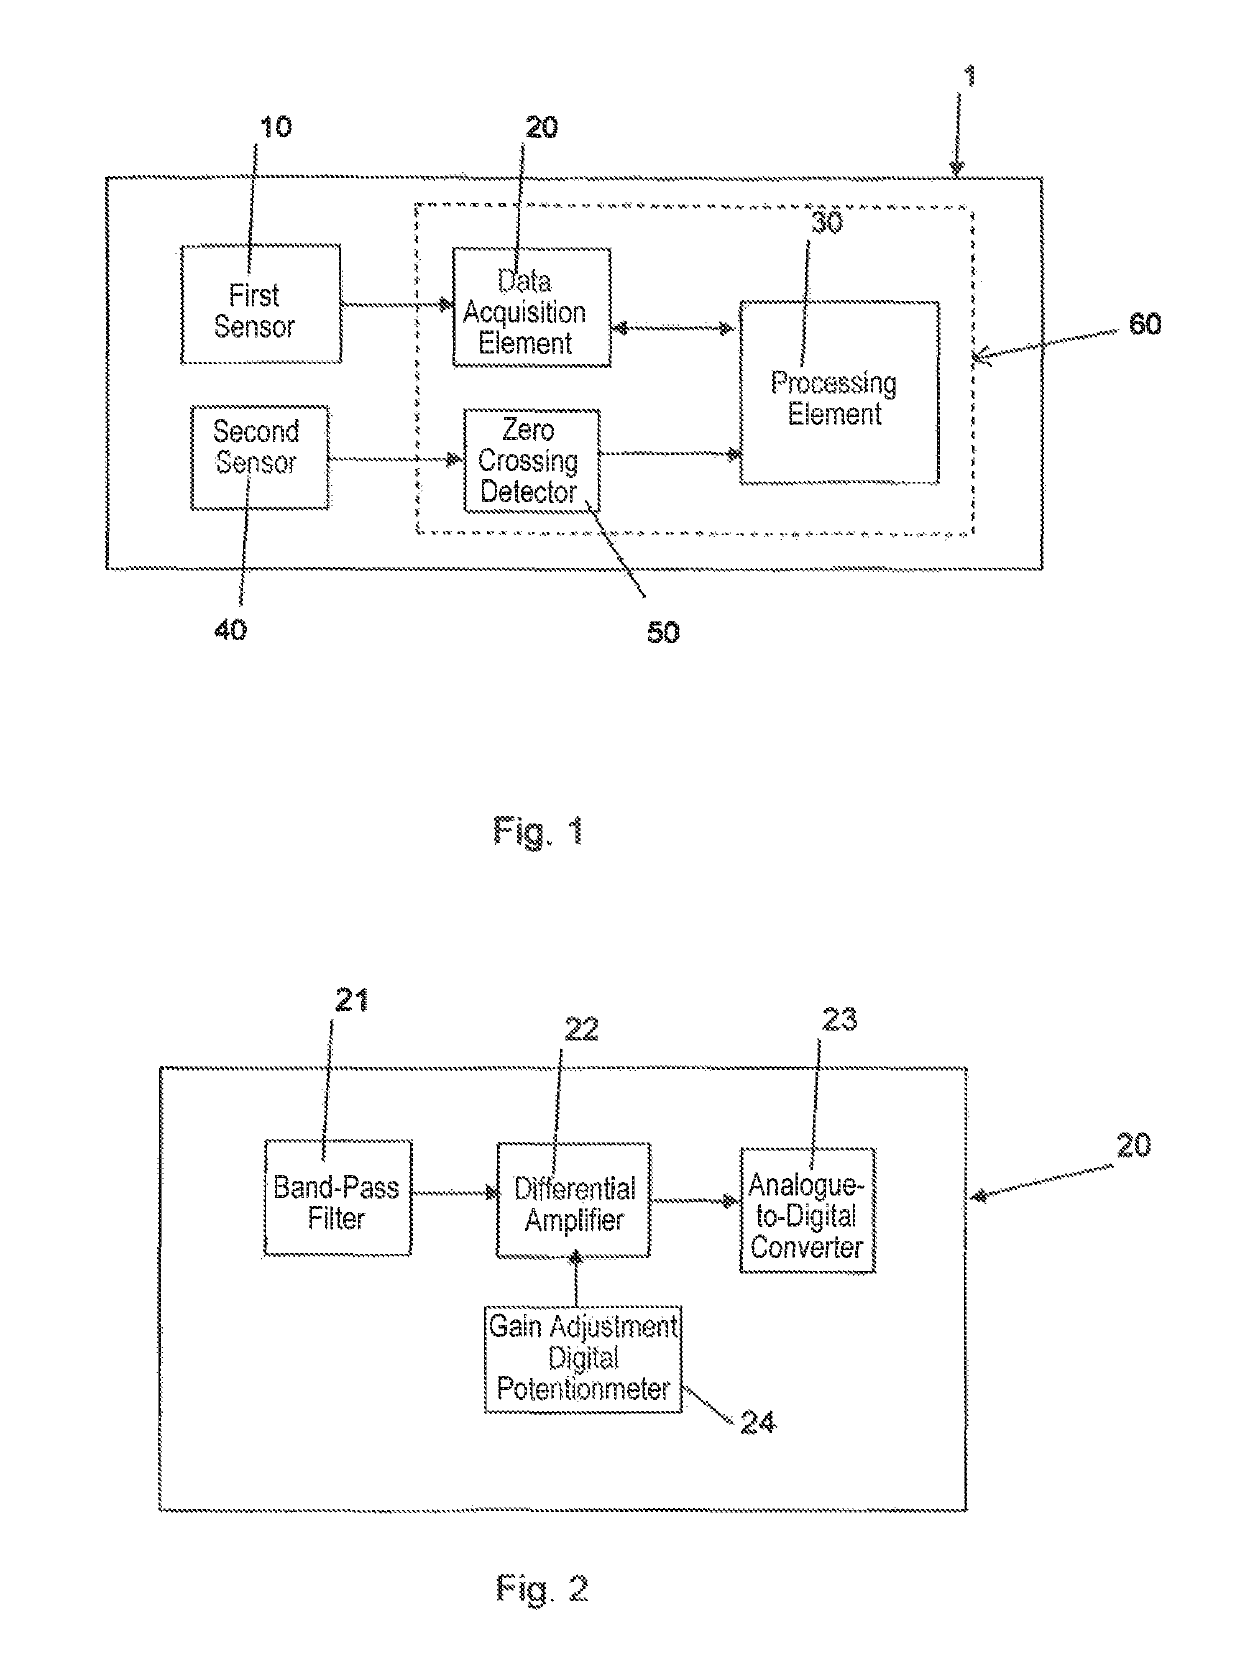 Apparatus and method for monitoring an electric power transmission system through partial discharges analysis